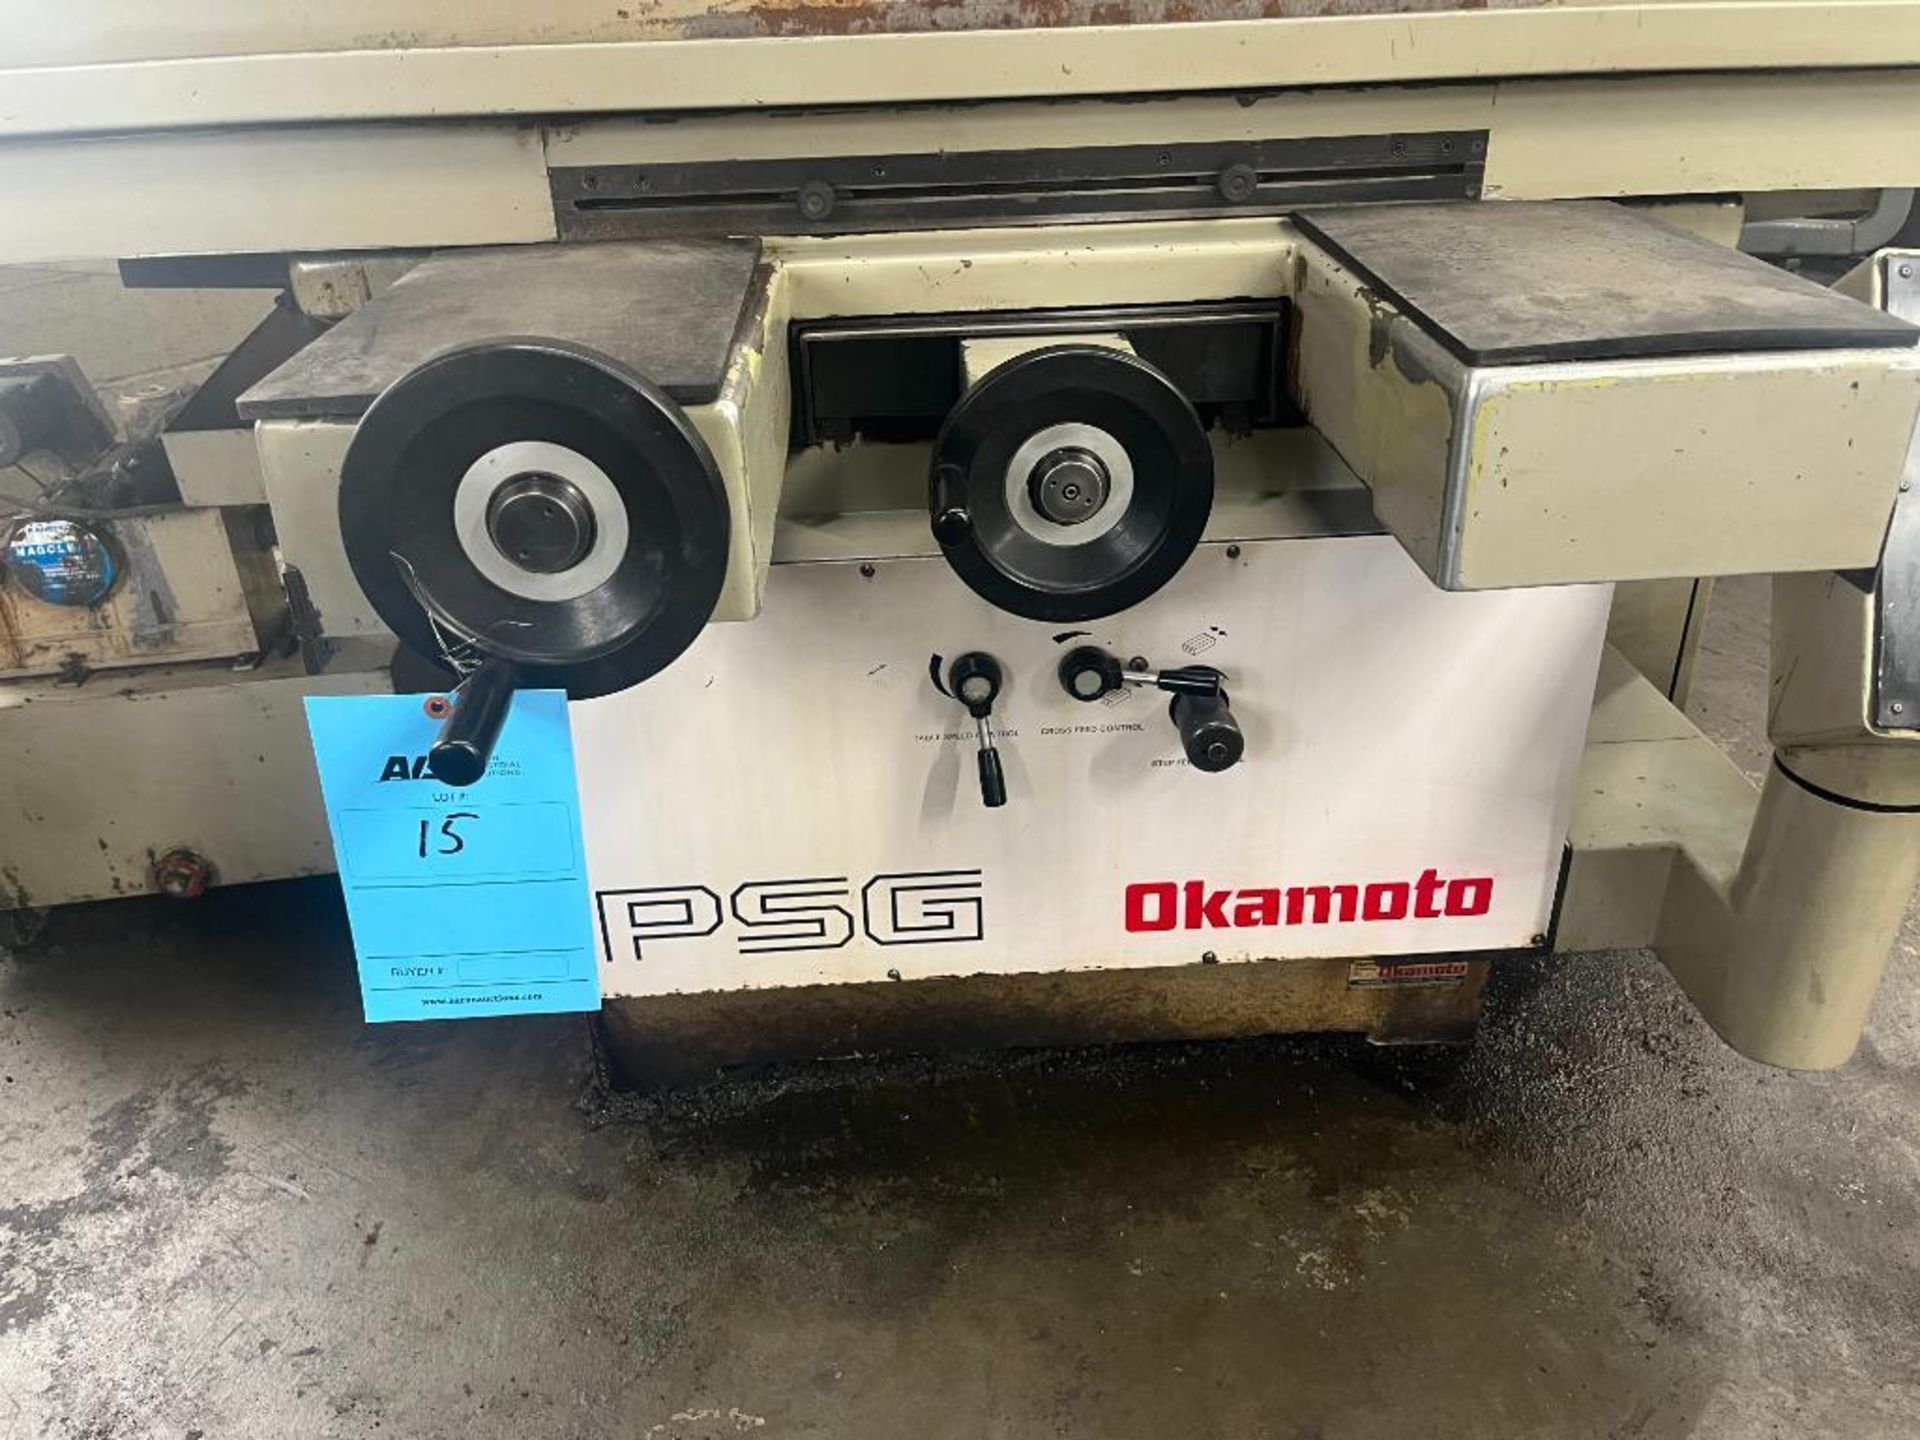 Okamoto PSG 20" x 24" Hydraulic Surface Grinder Model 2024DX, S/N 67030 with Chuck Control. 20" x 24 - Image 22 of 23